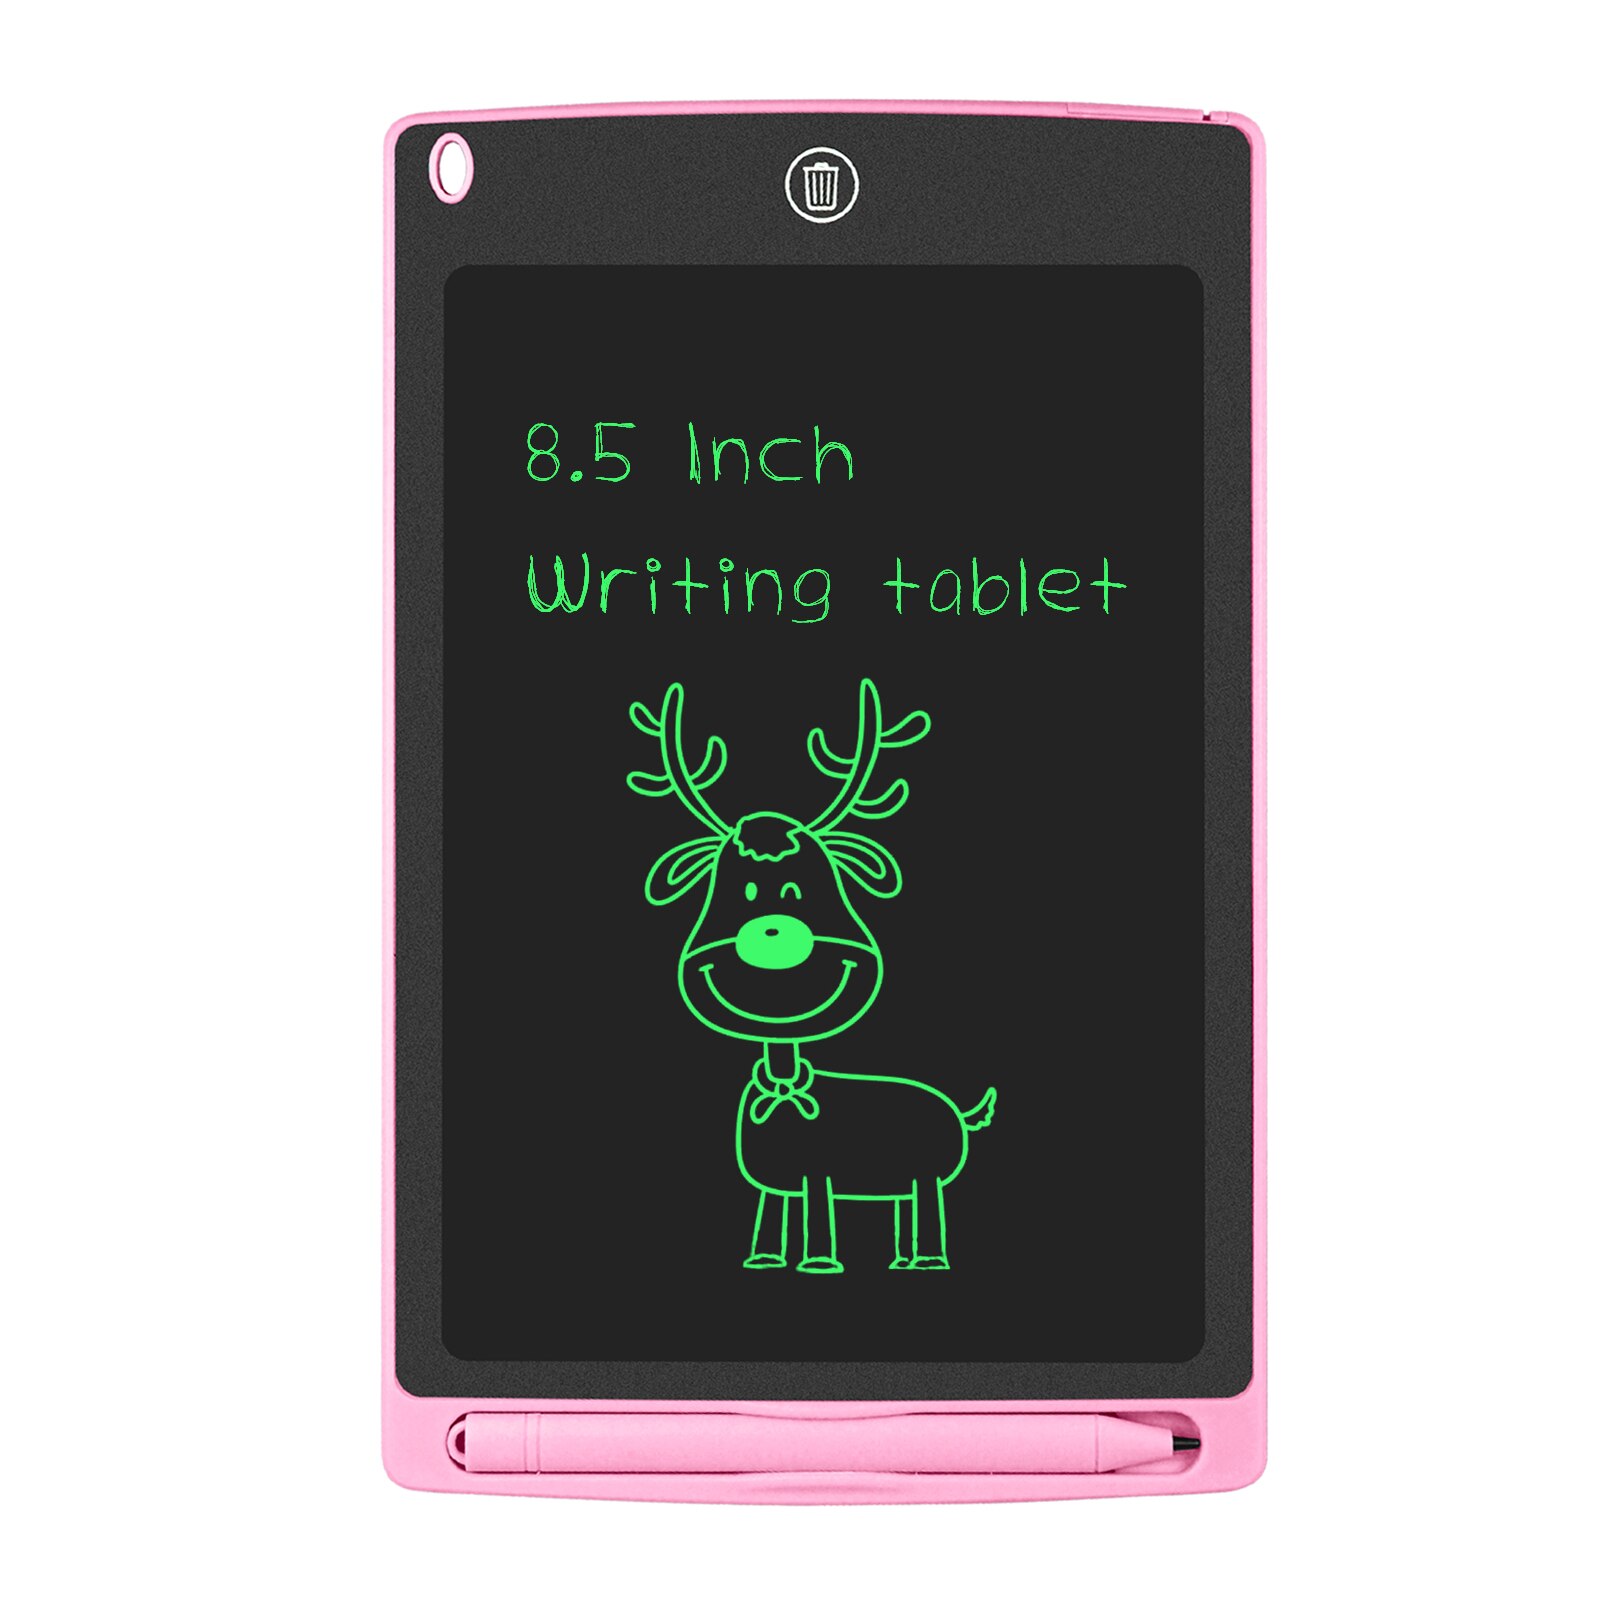 Mini Writing Tablet 8.5 Inch Paperless LCD Electronic Writing Tablet